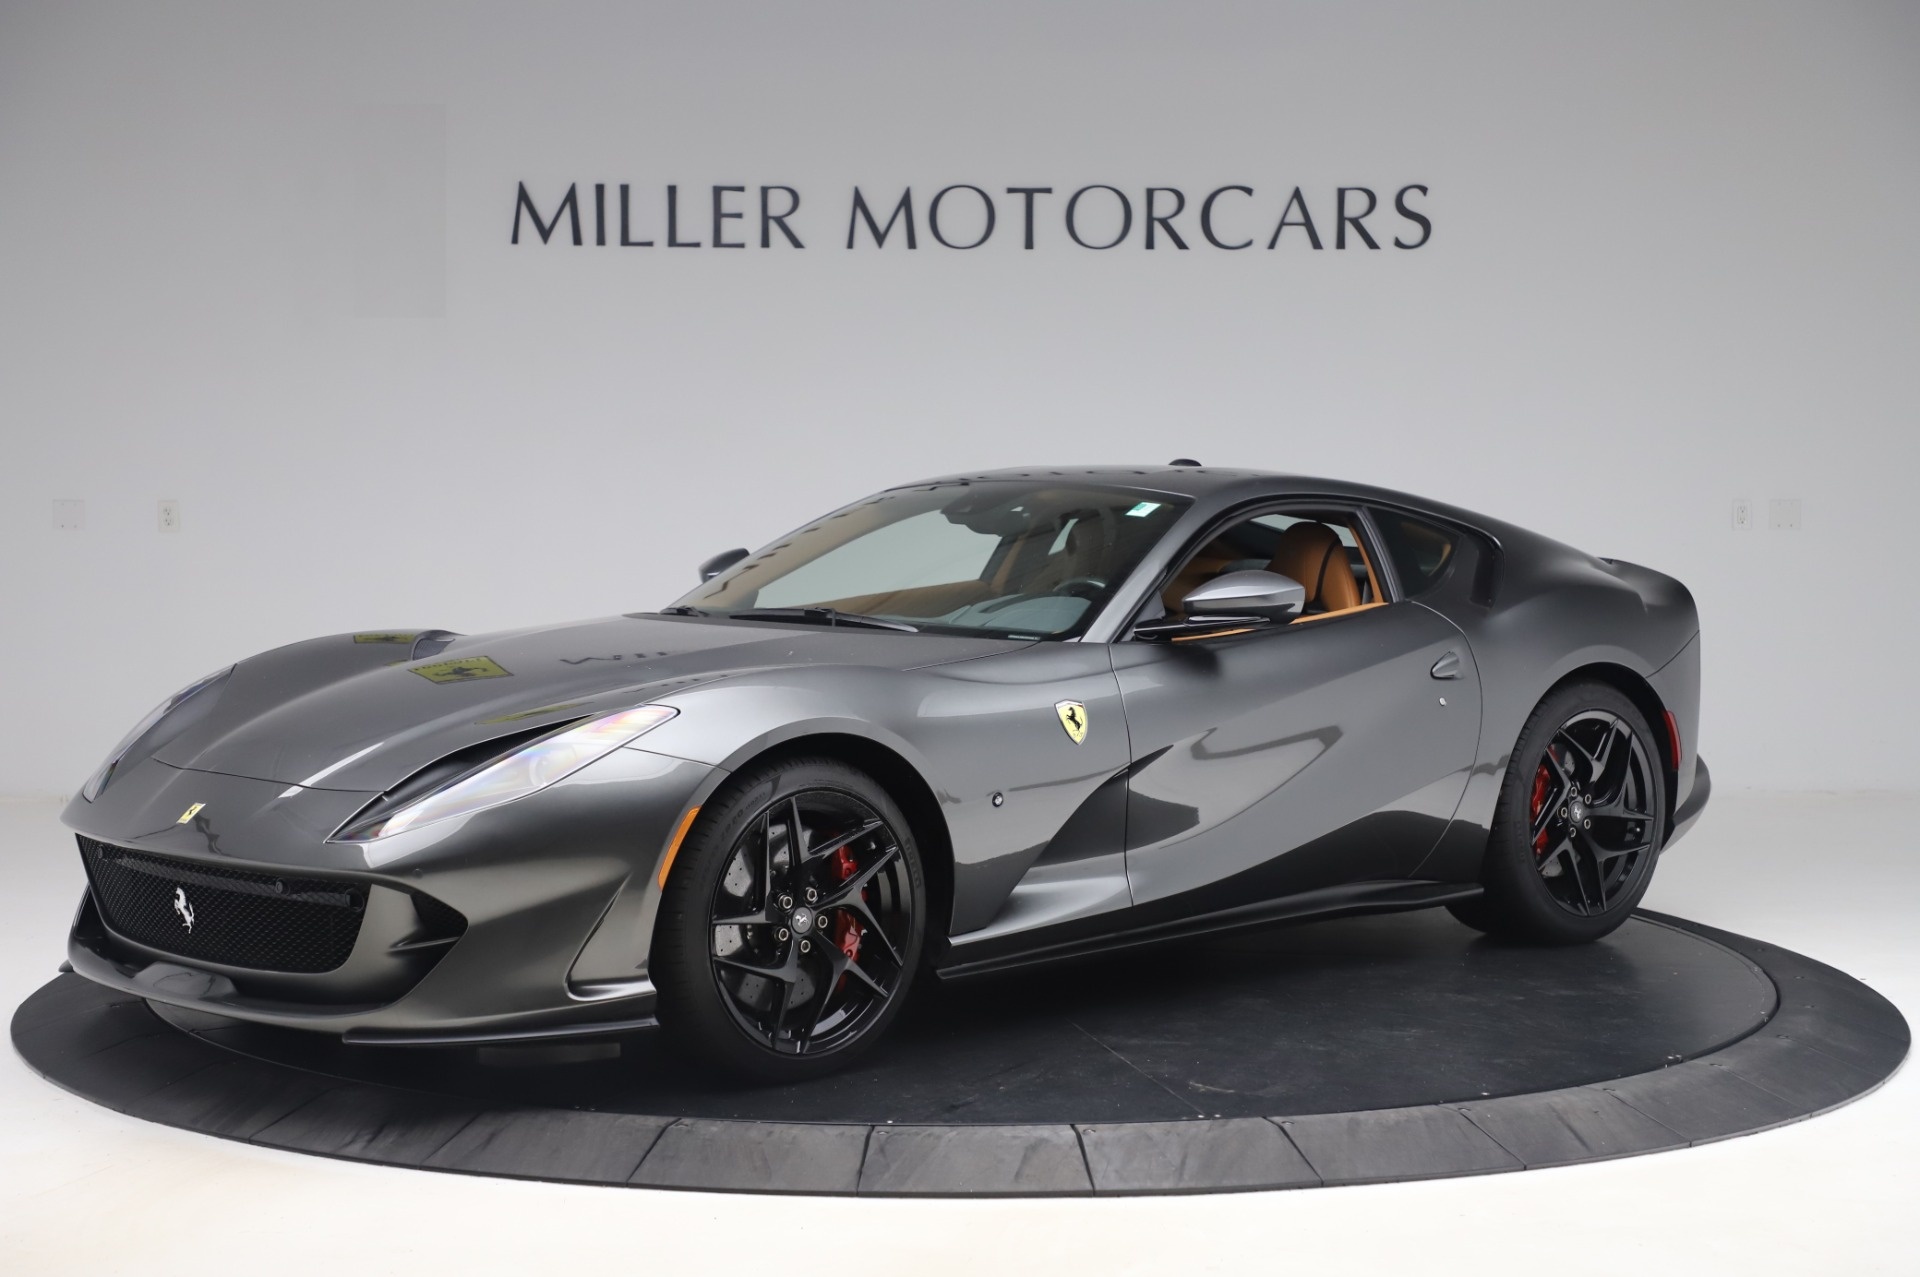 Ferrari 812 Superfast, Pre-owned model, Immaculate condition, Exclusive opportunity, 1920x1280 HD Desktop